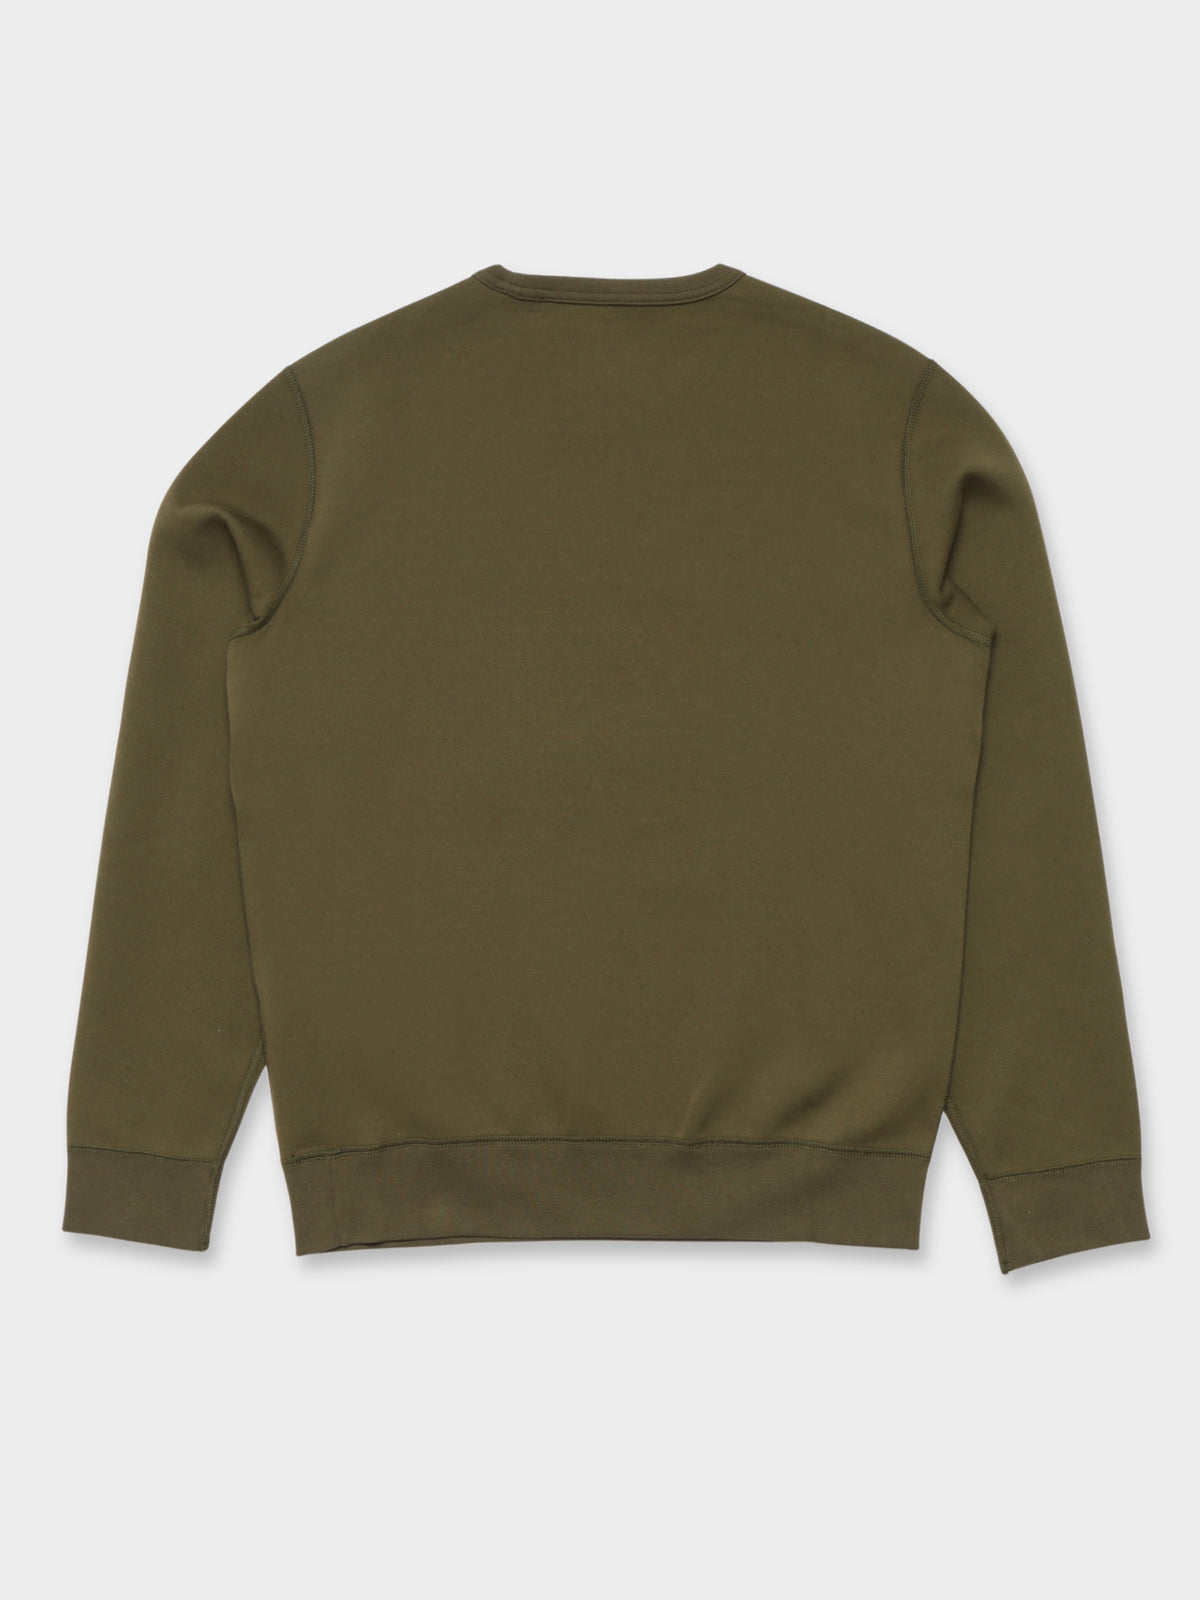 Long Sleeve Crew Sweater in Olive